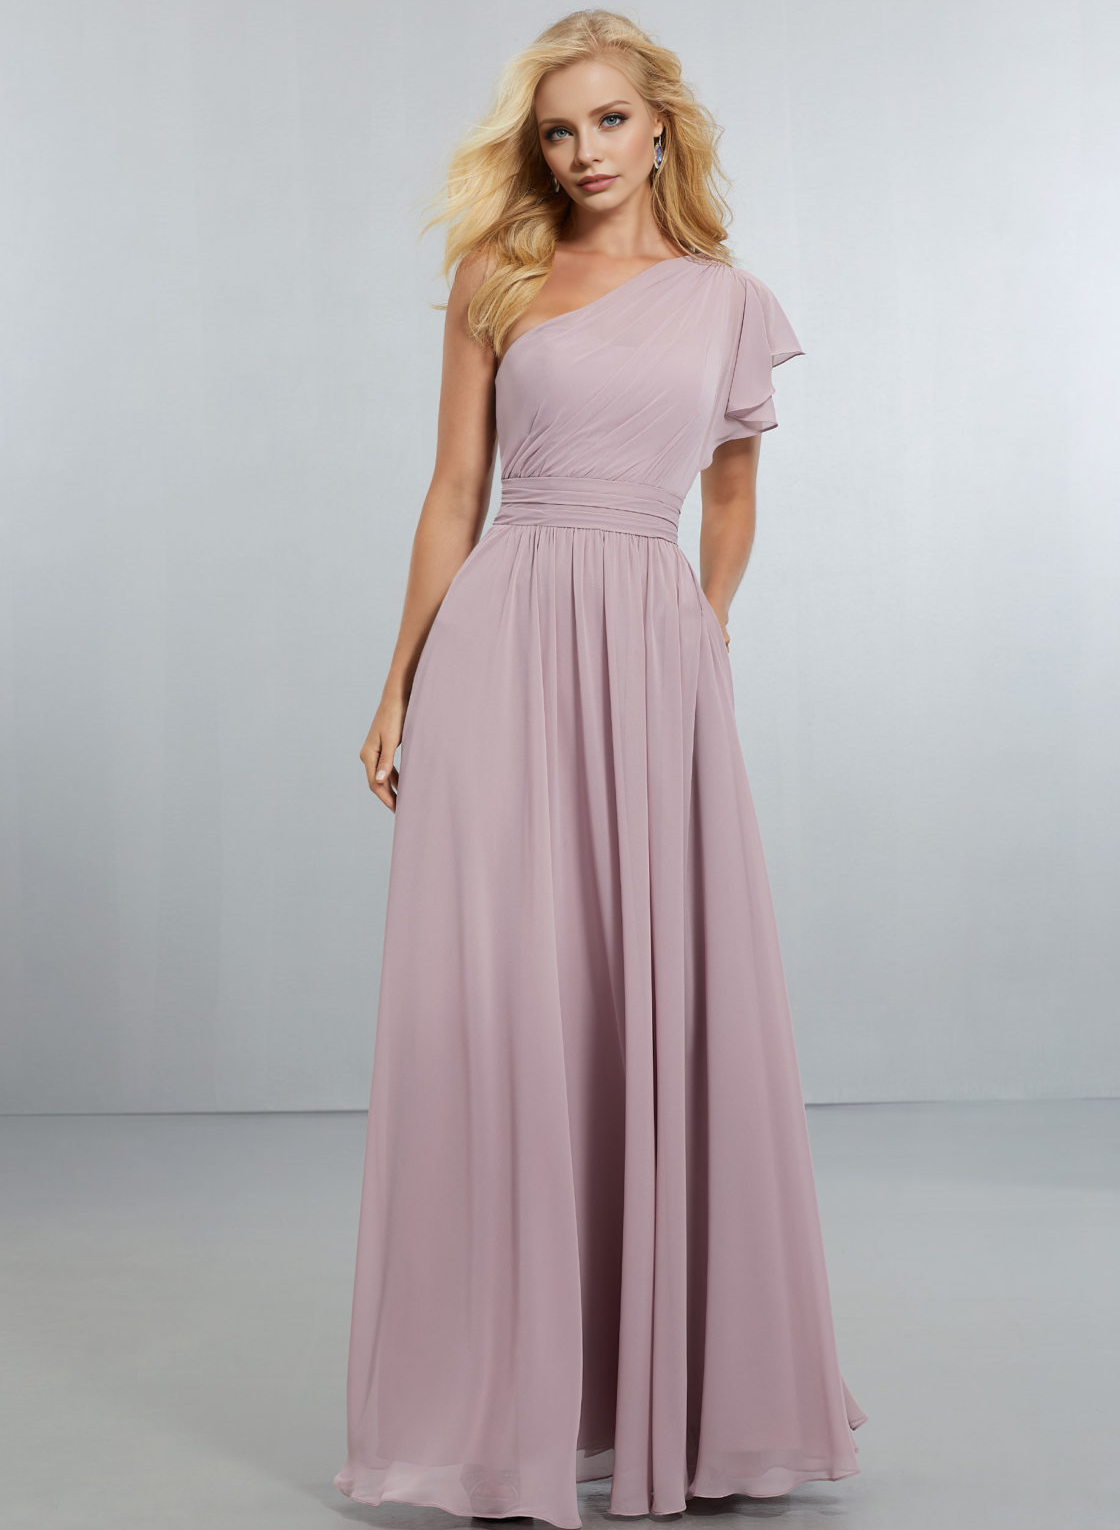 One-Shoulder A-Line Chiffon Bridesmaid Dresses With Pockets